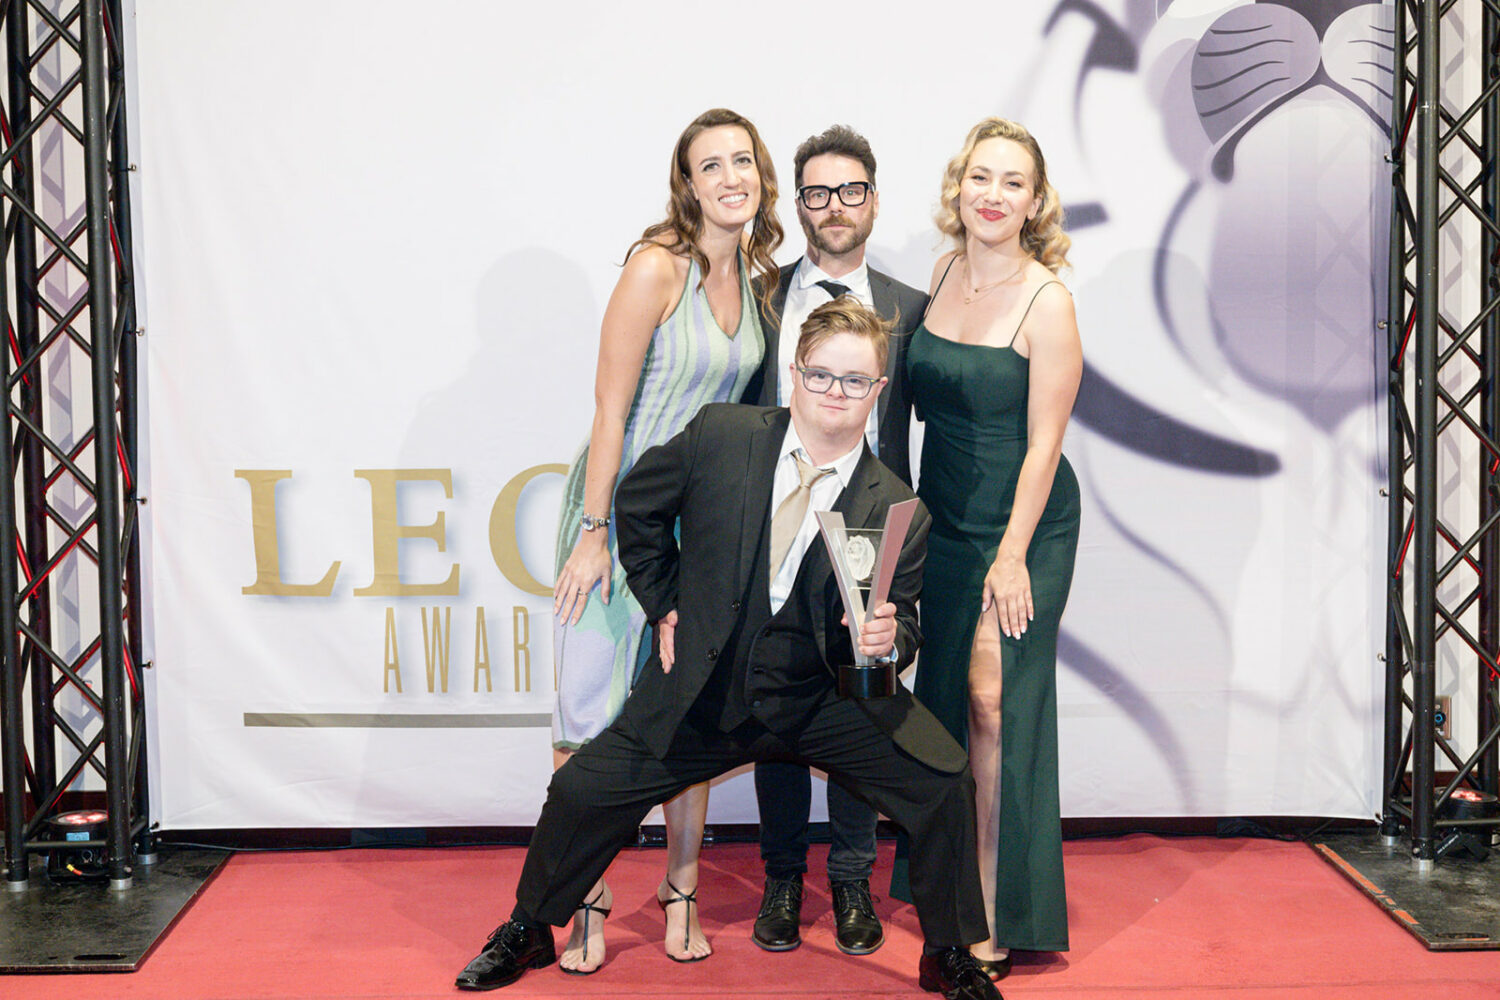 young man with Down syndrome, wearing glasses and a black suit, crouches down while holding a Leo award, with two white women and a white man wearing awards ceremony outfits behind him